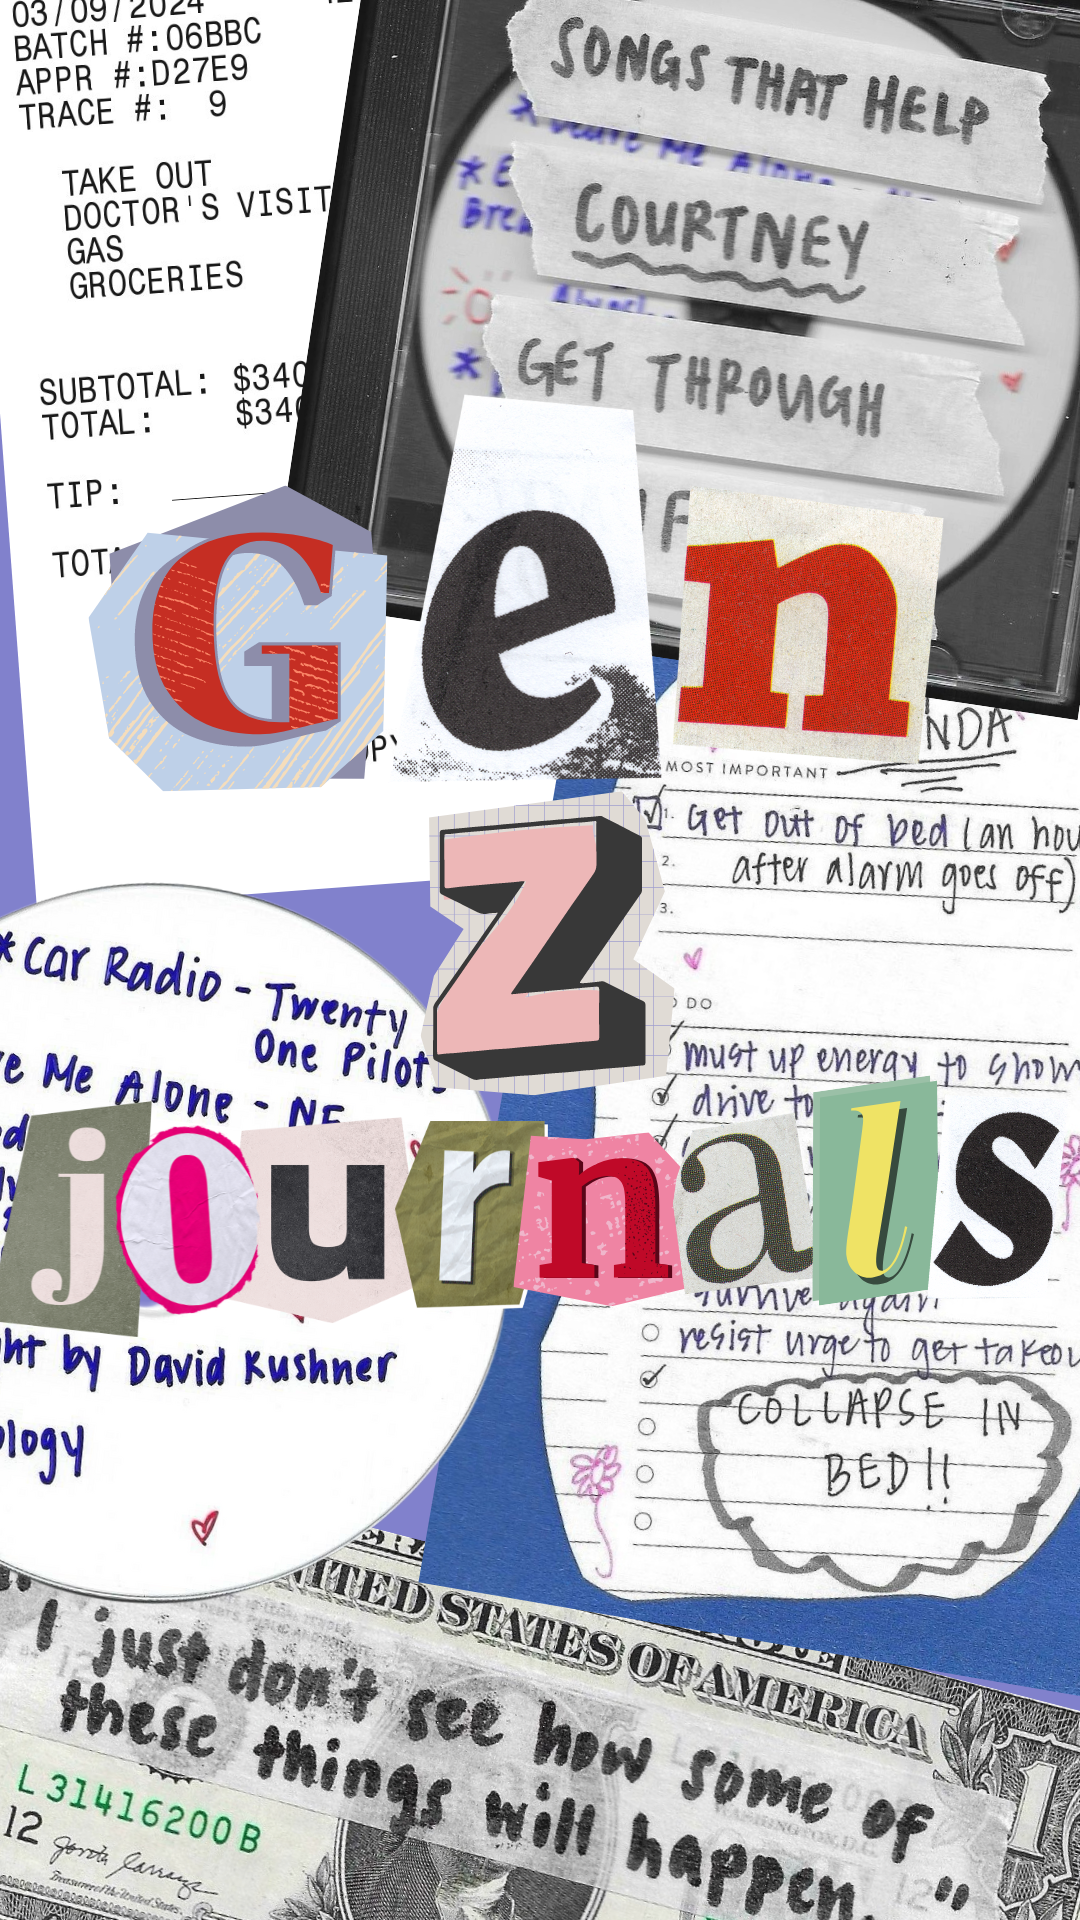 Collage with various texts including &quot;Gen Z&quot;, &quot;journal&quot;, and snippets of different notes and messages